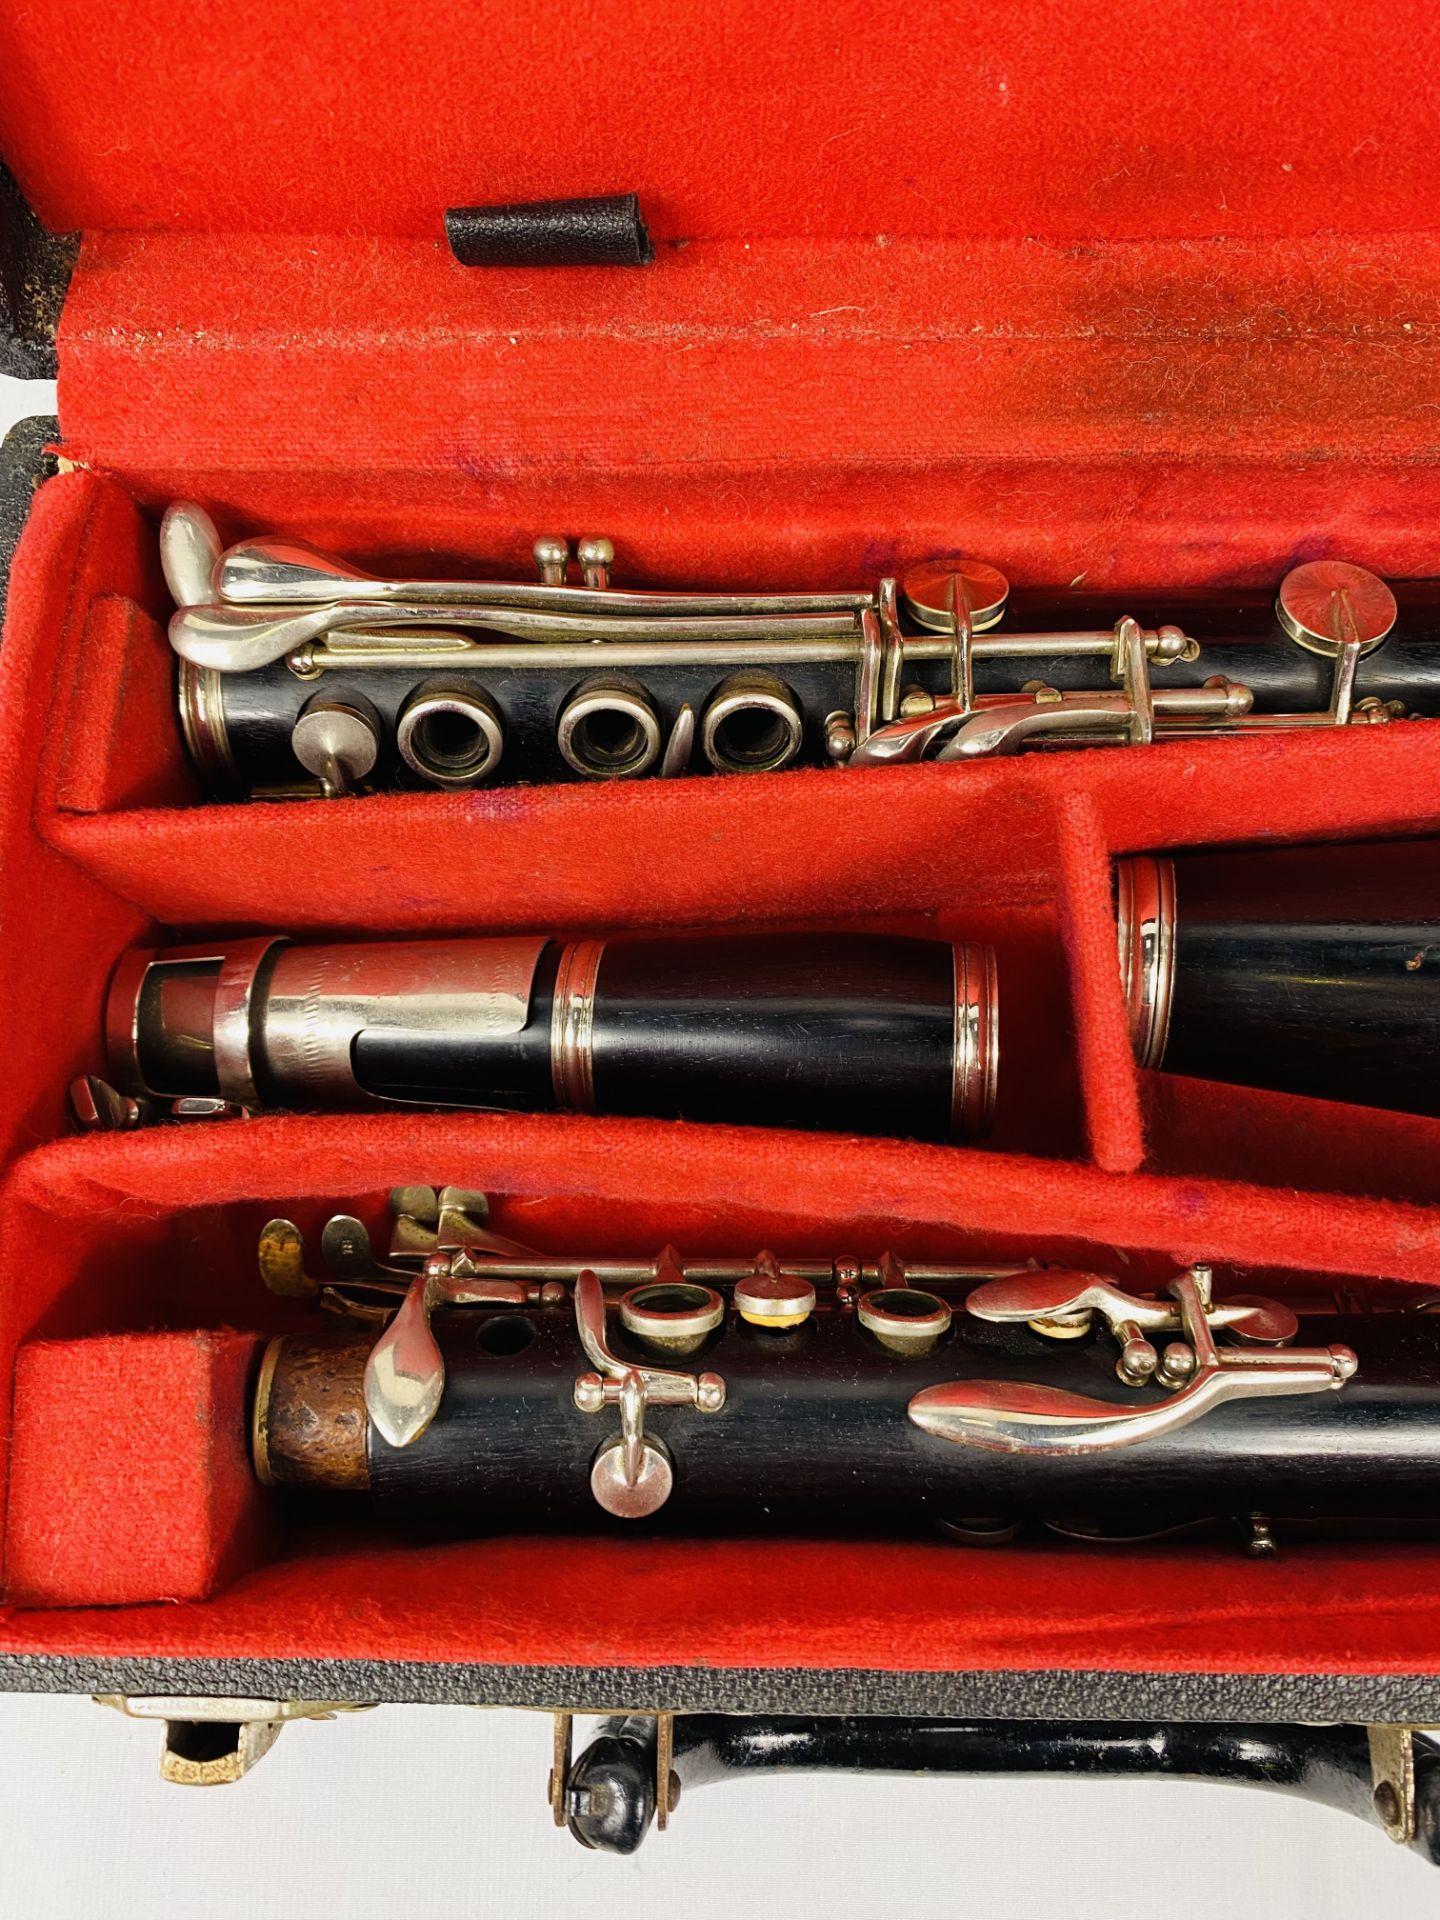 Boosey and Hawkes clarinet in case - Image 2 of 4